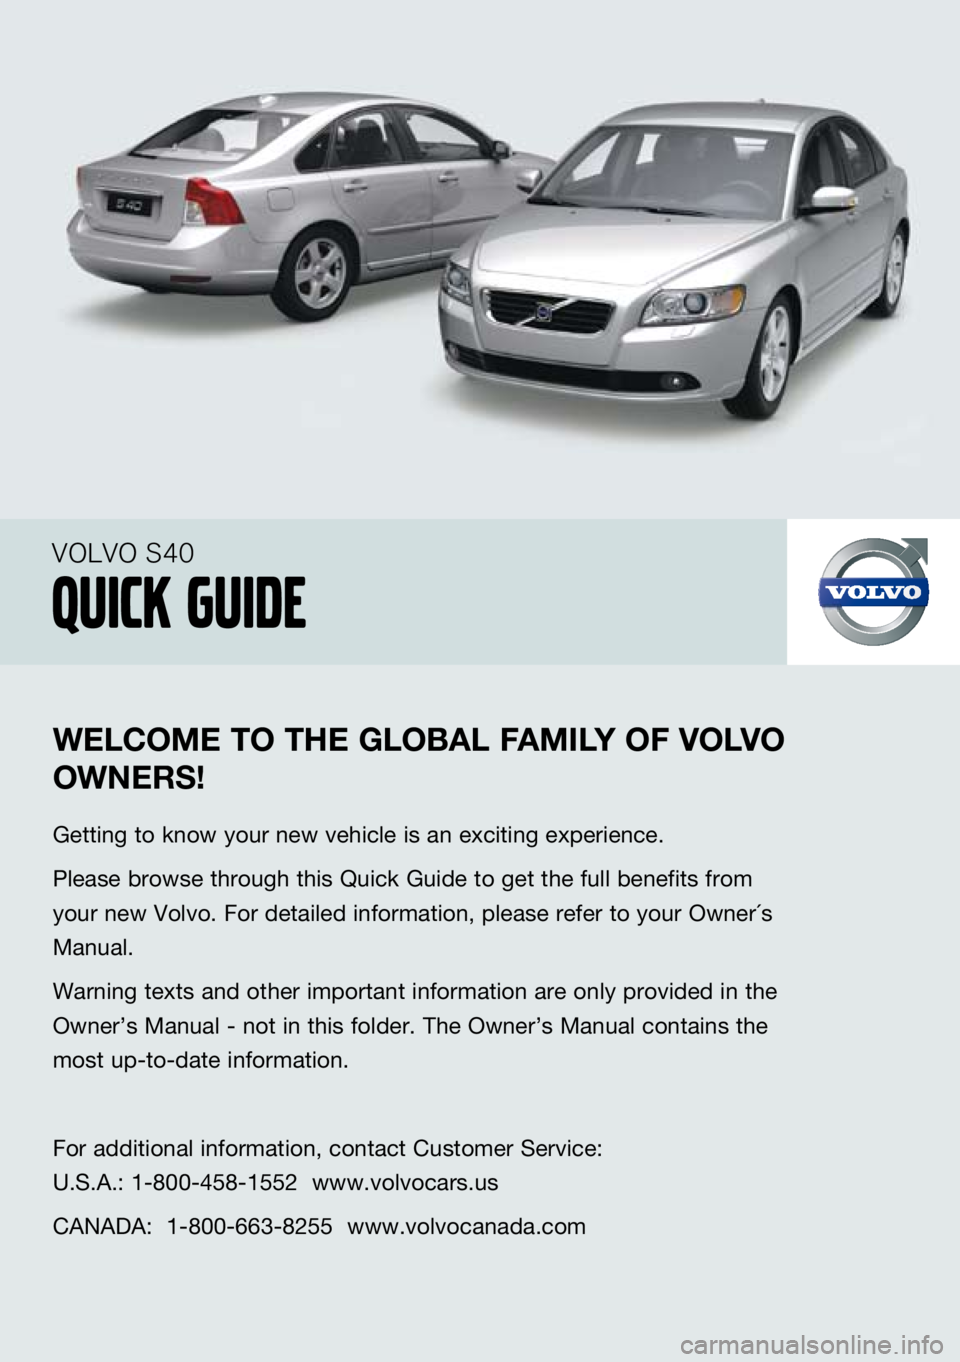 VOLVO S40 2009  Quick Guide 
Welc Ome TO T he glObAl FA mIly OF  vO lv O 
OW neRS!
Getting to know your new vehicle is an exciting experience.
Please browse through this Quick Guide to get the full benefits from 
your new Volvo.